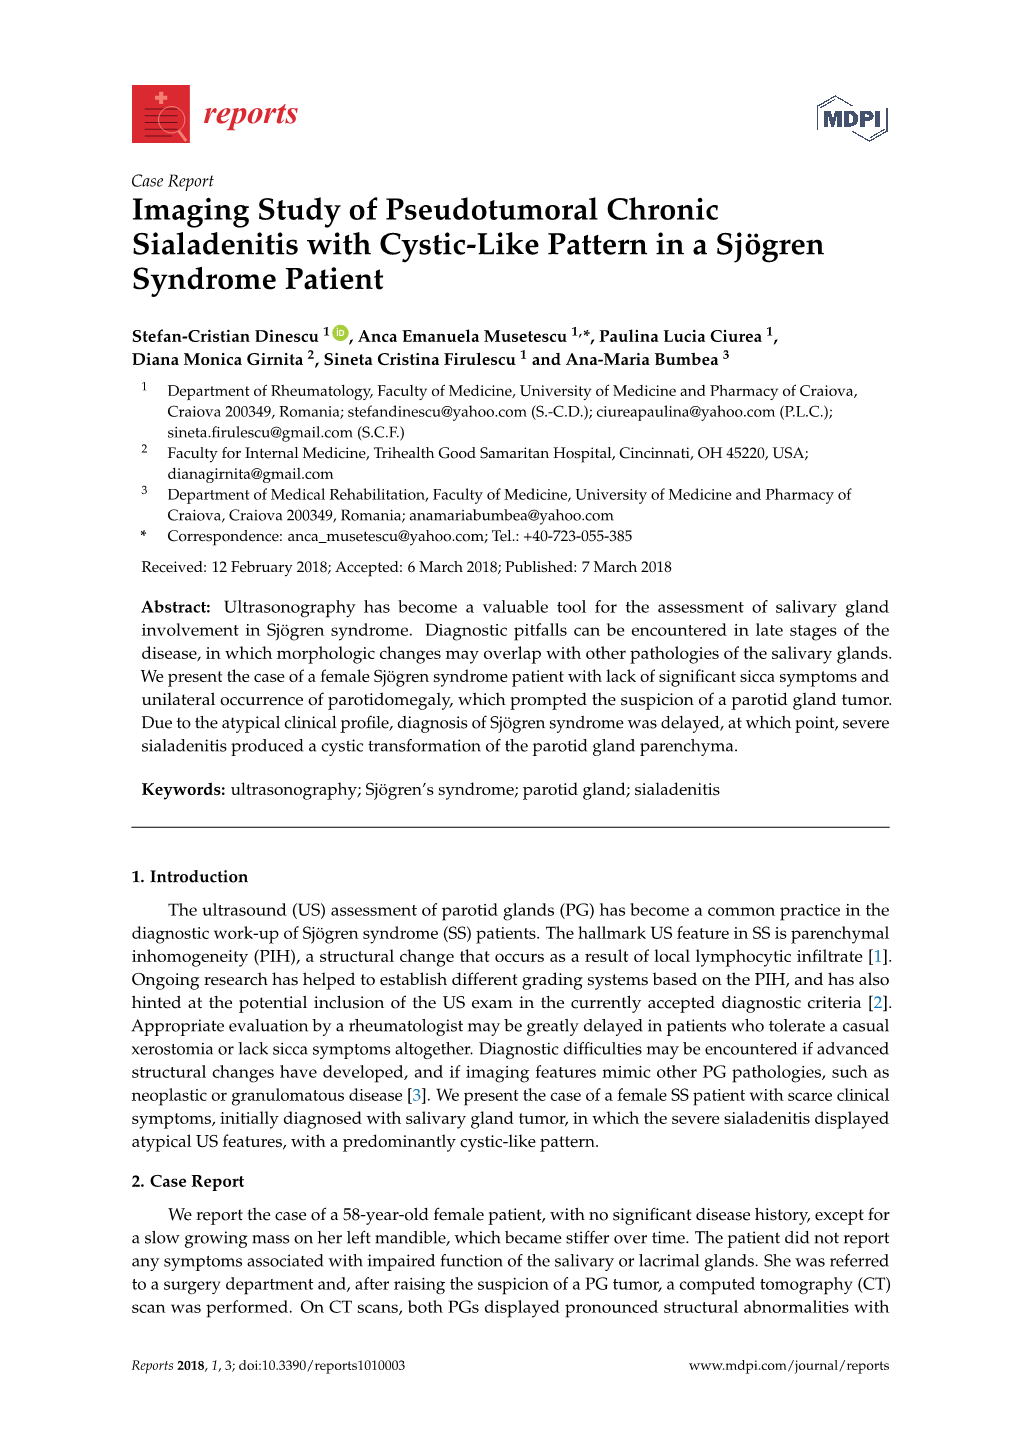 Imaging Study of Pseudotumoral Chronic Sialadenitis with Cystic-Like Pattern in a Sjögren Syndrome Patient